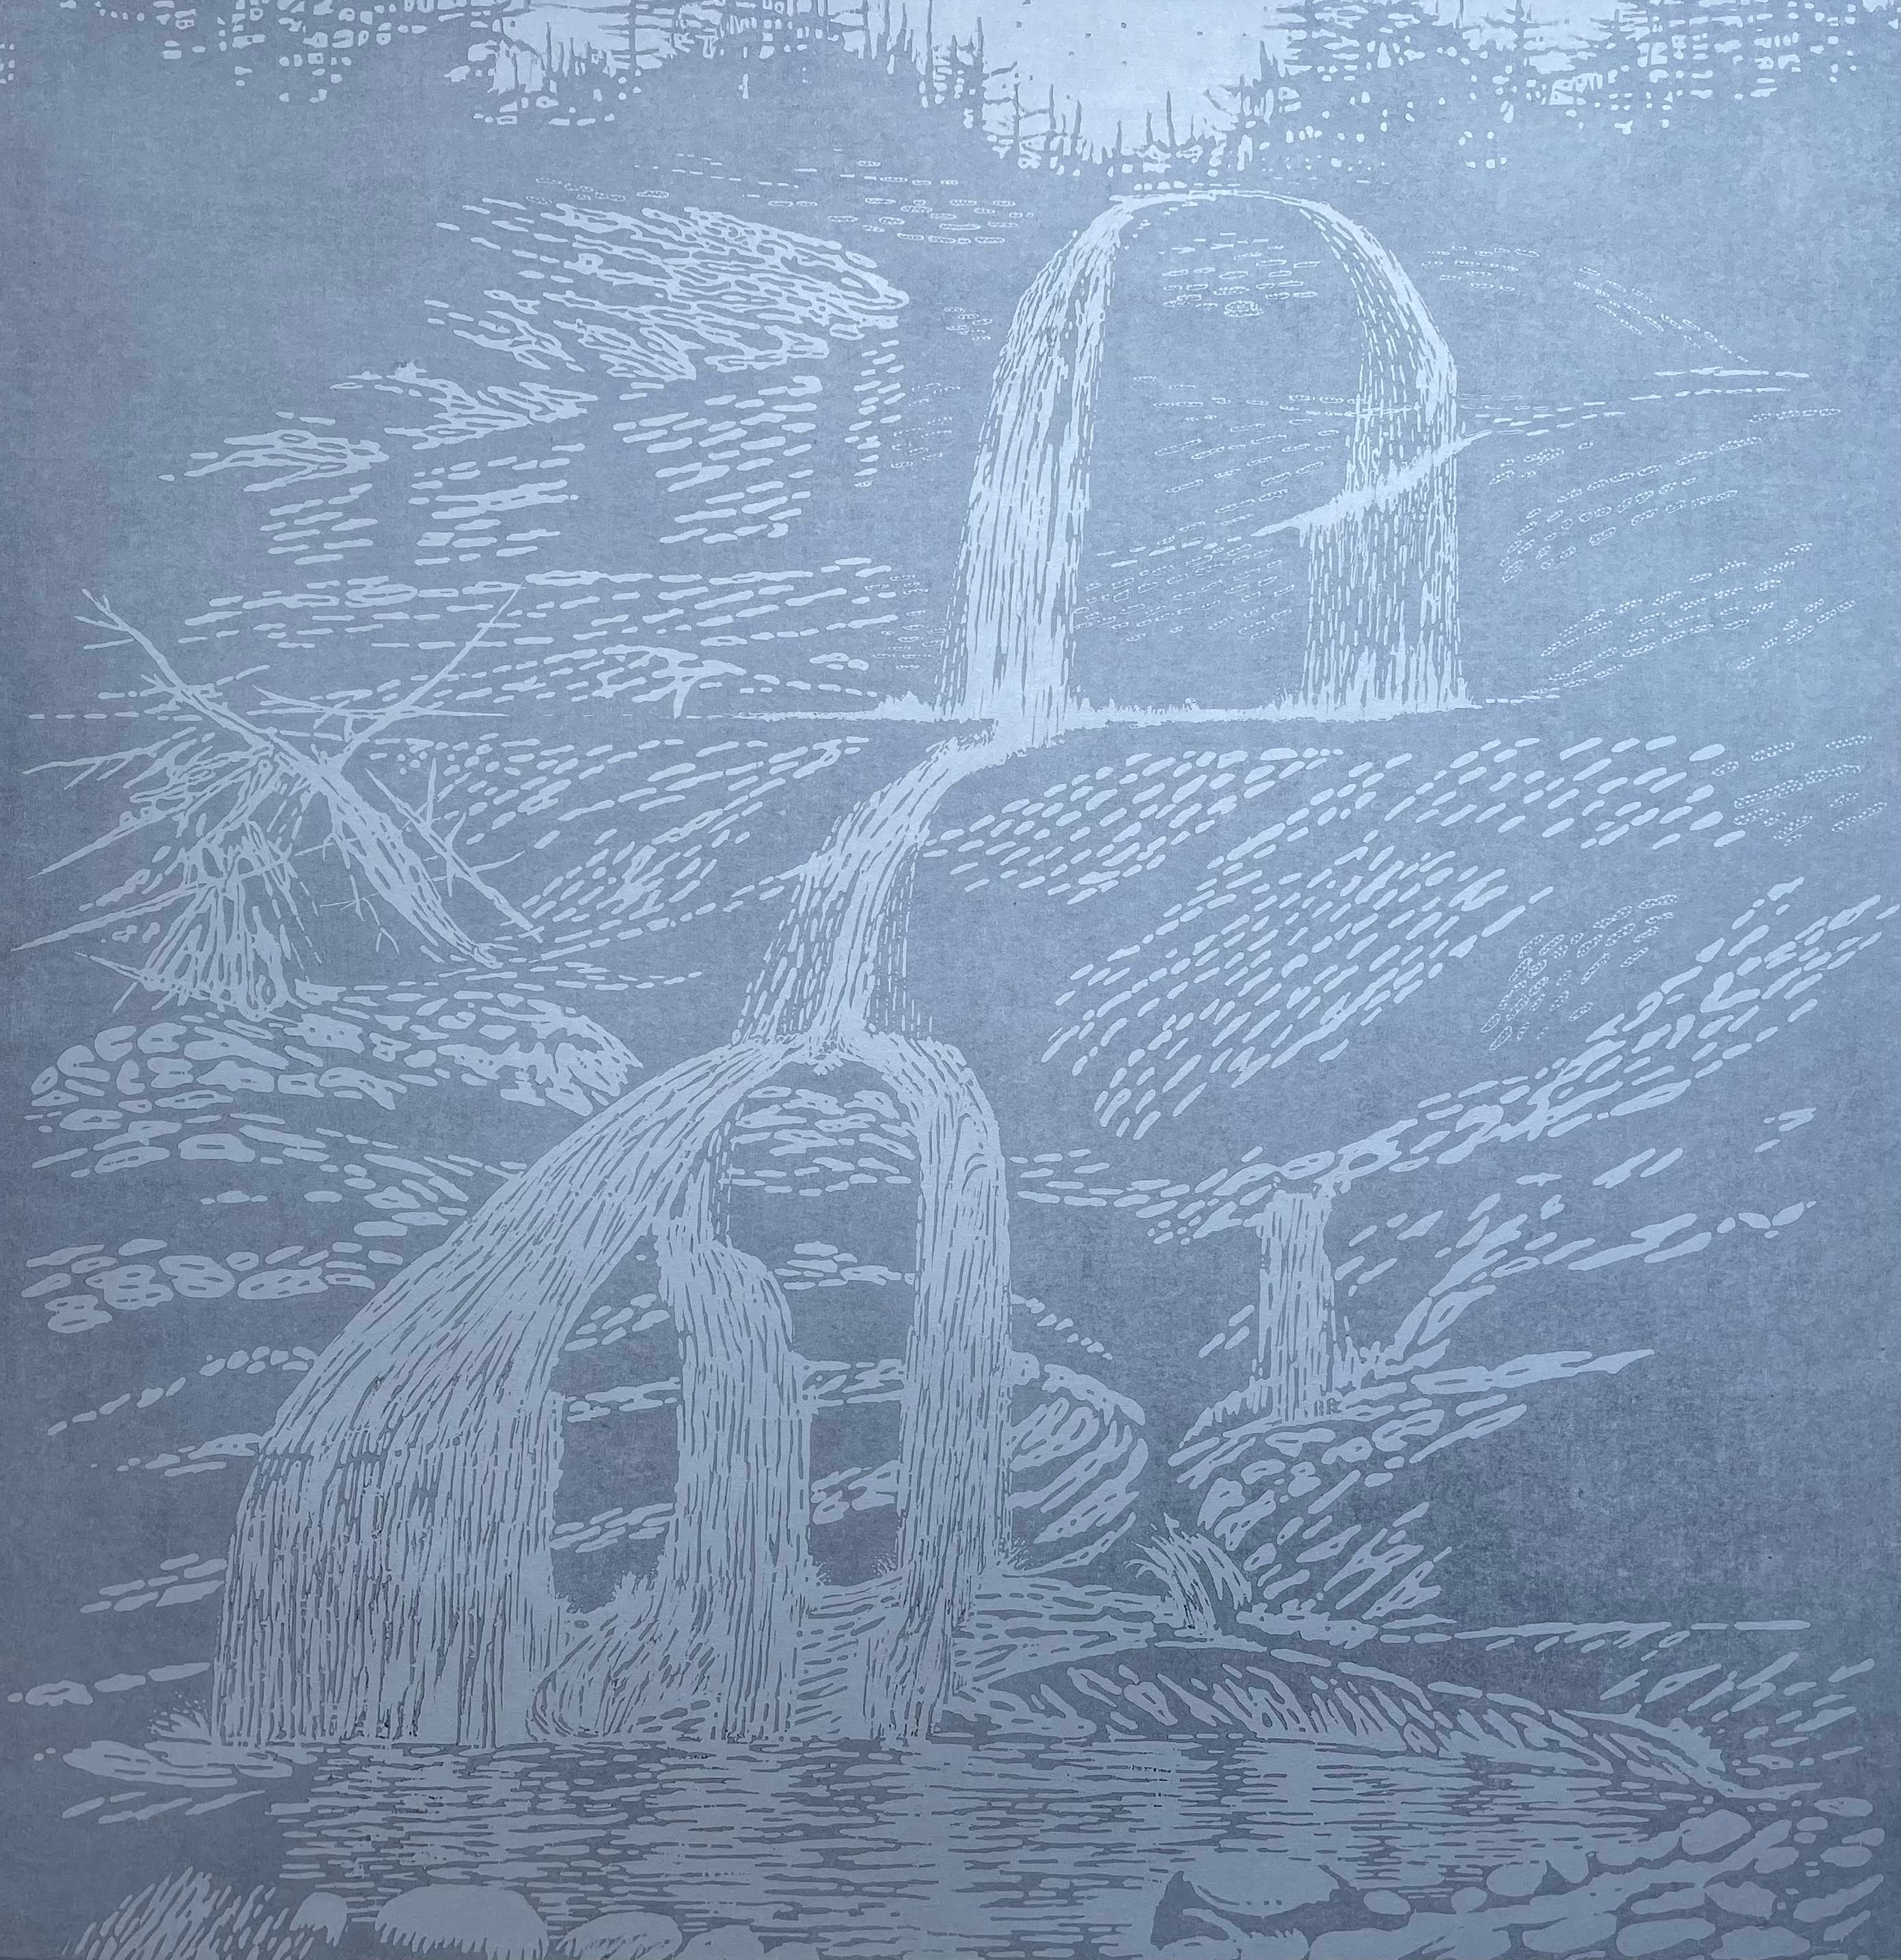 Falls Ten, Unique Woodcut Print, Waterfall in Silver and Pale Grey Blue